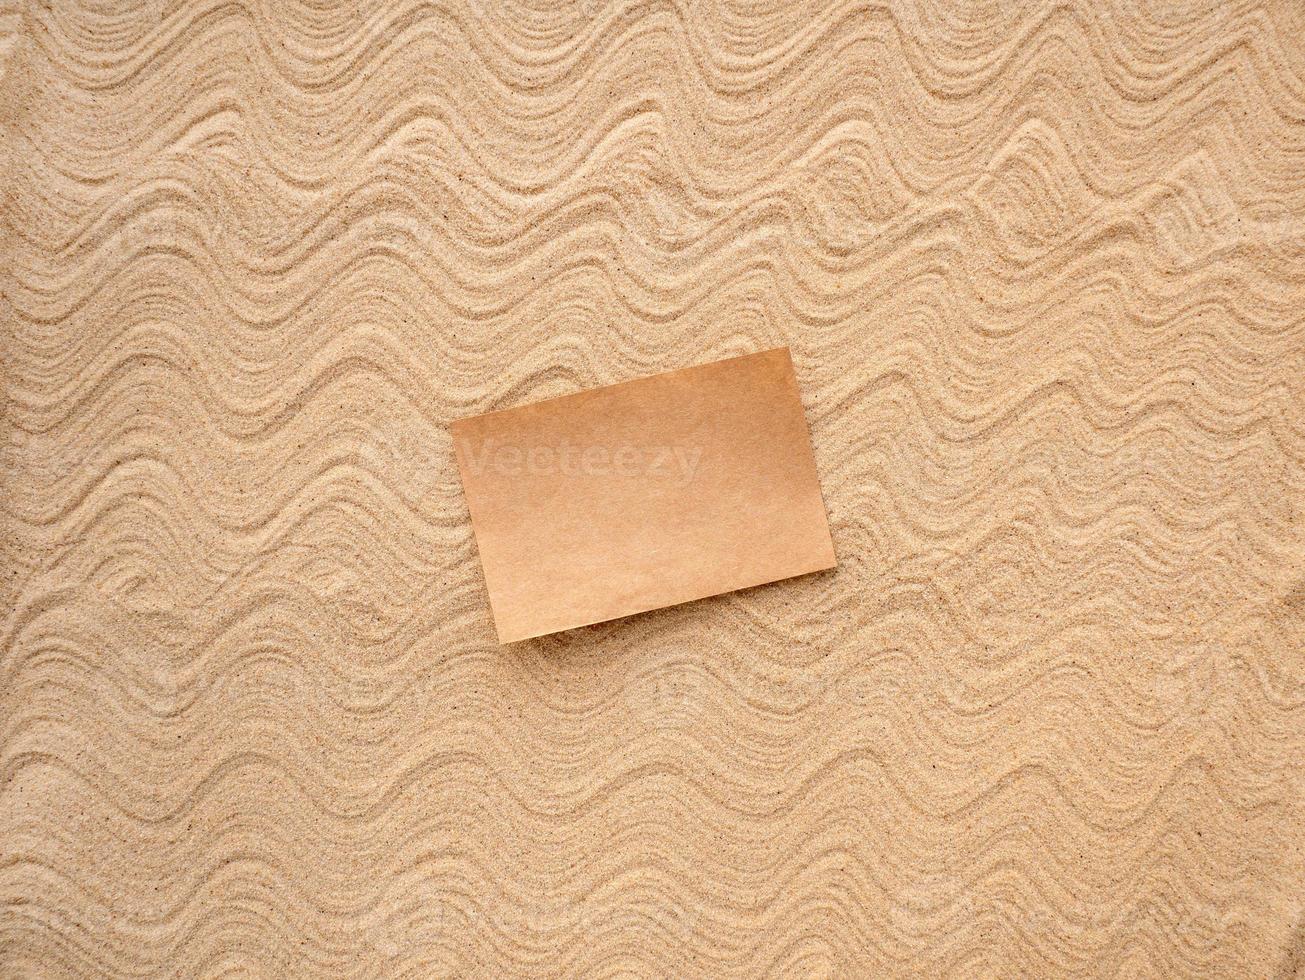 Letter in the sand. Craft paper for writing on patterned sea sand. photo